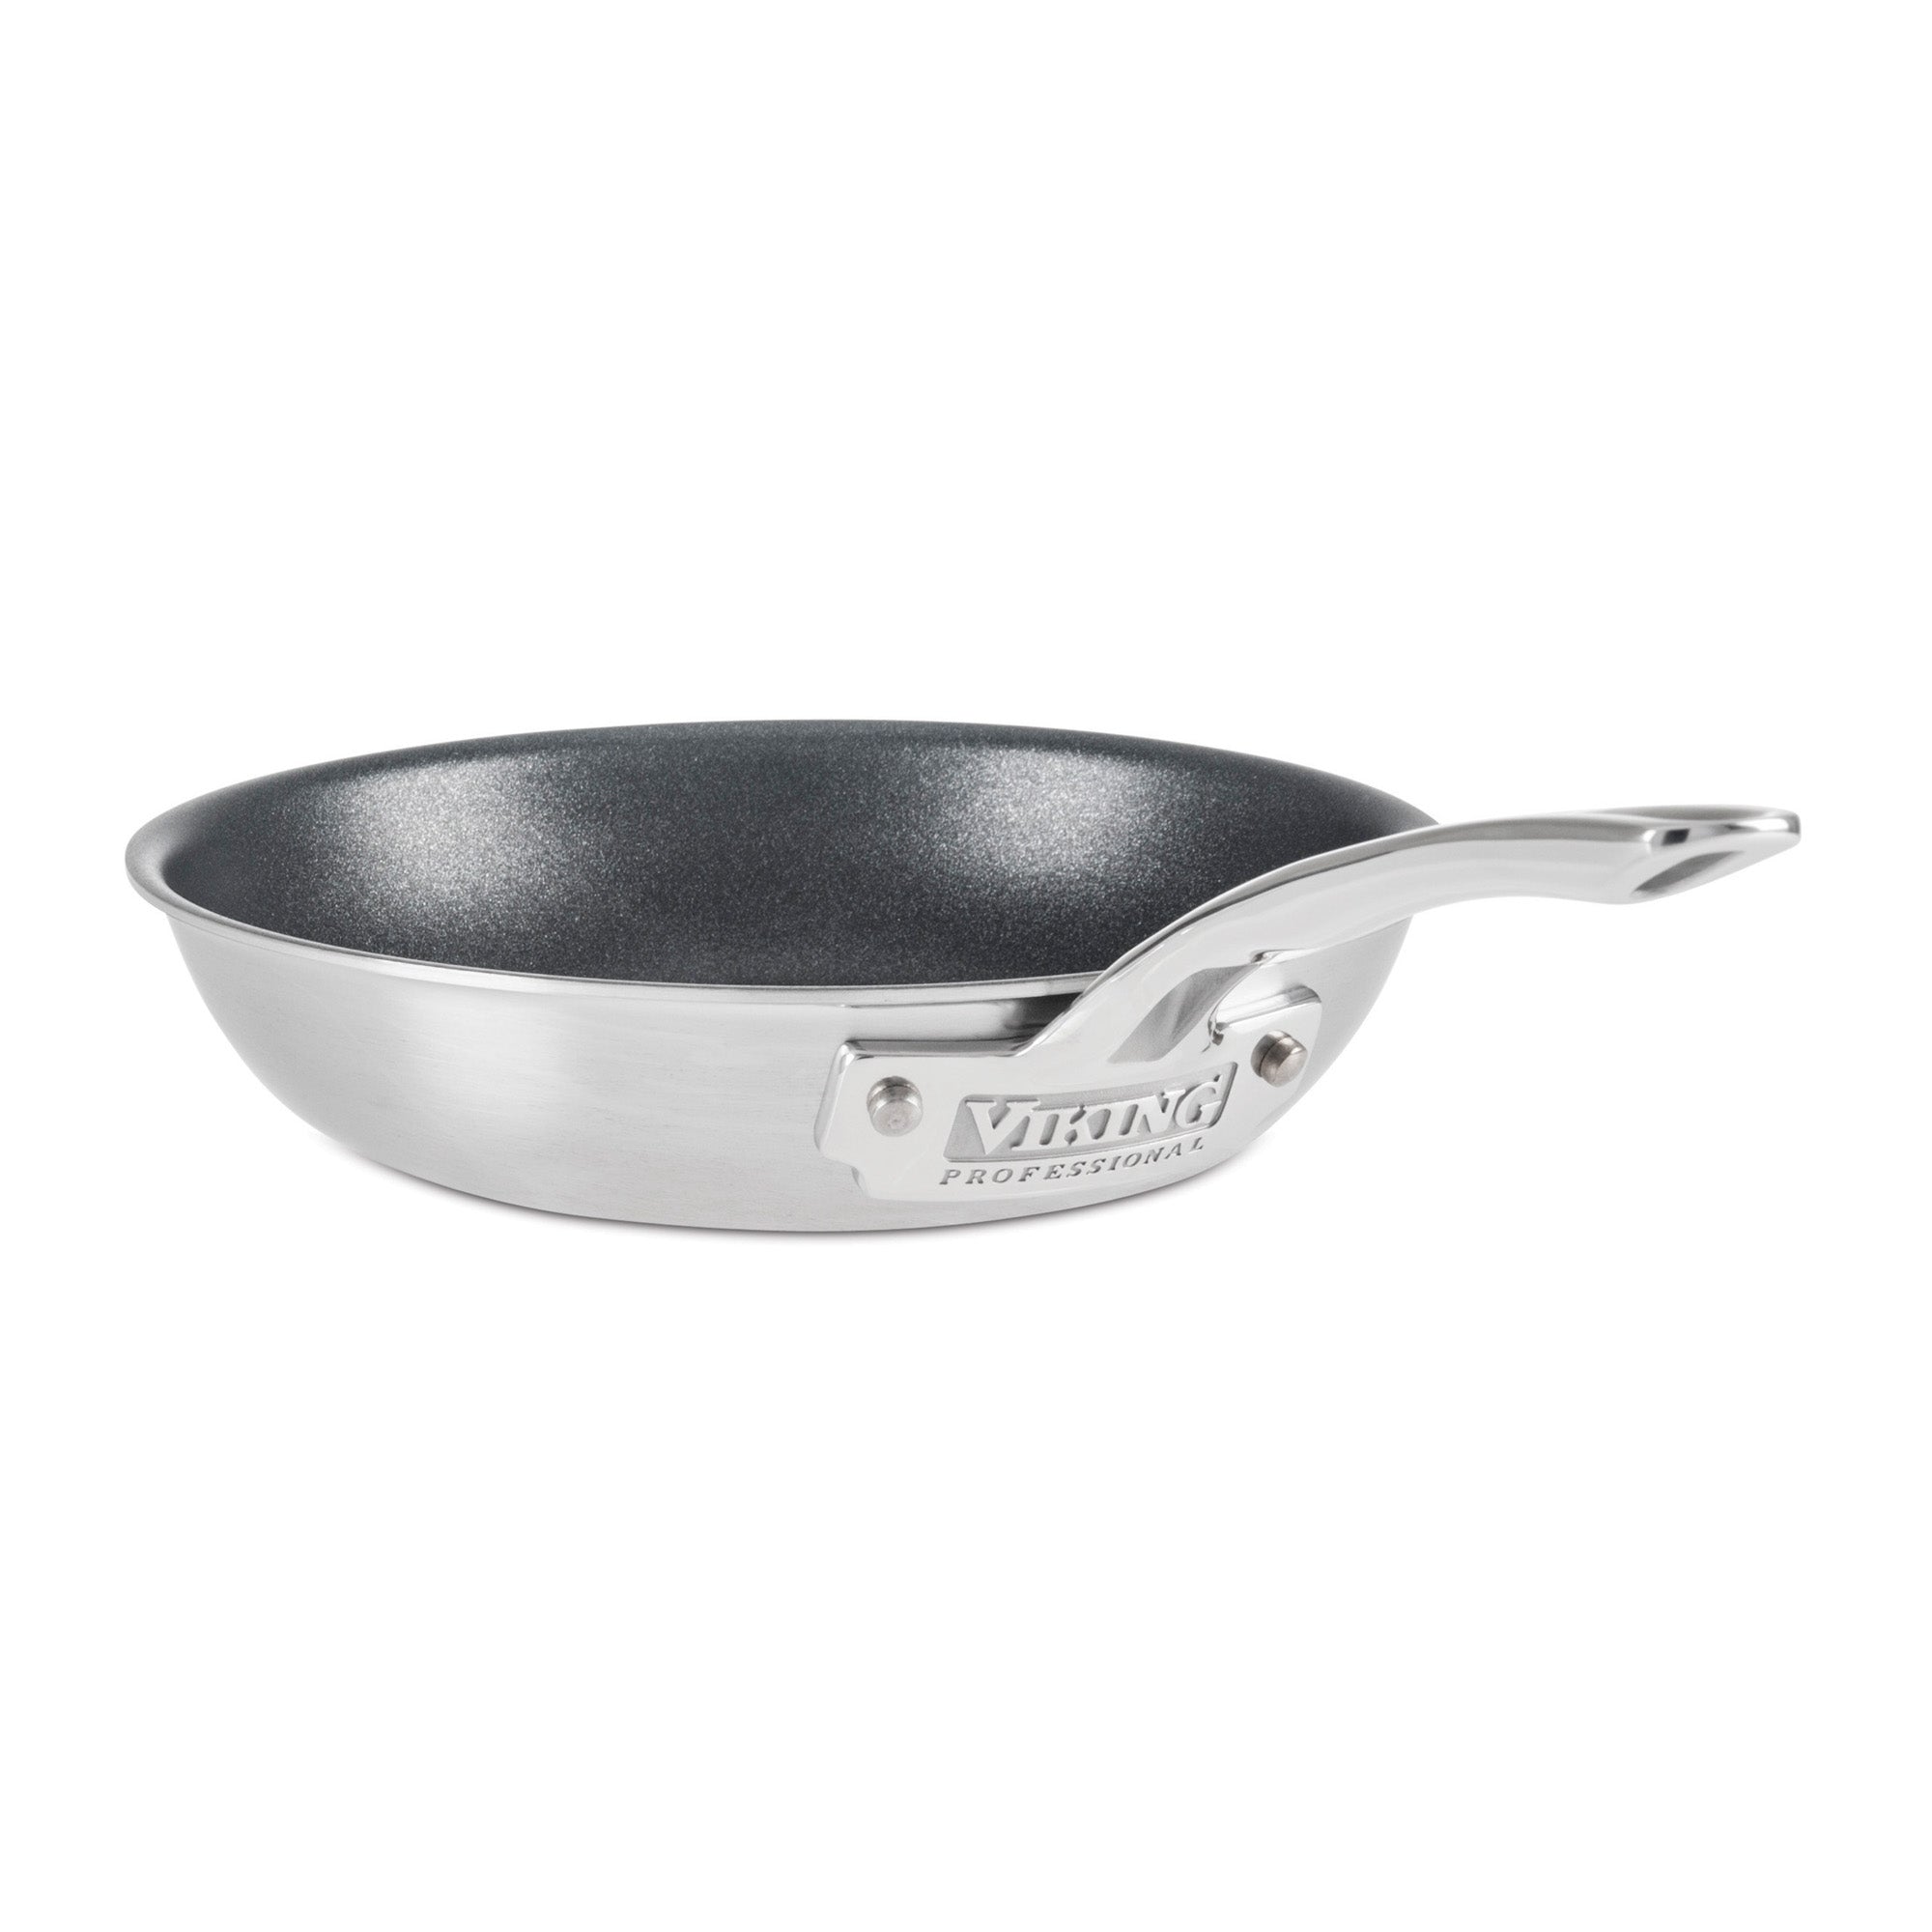 Viking Professional 5-Ply 8-Inch Nonstick Fry Pan